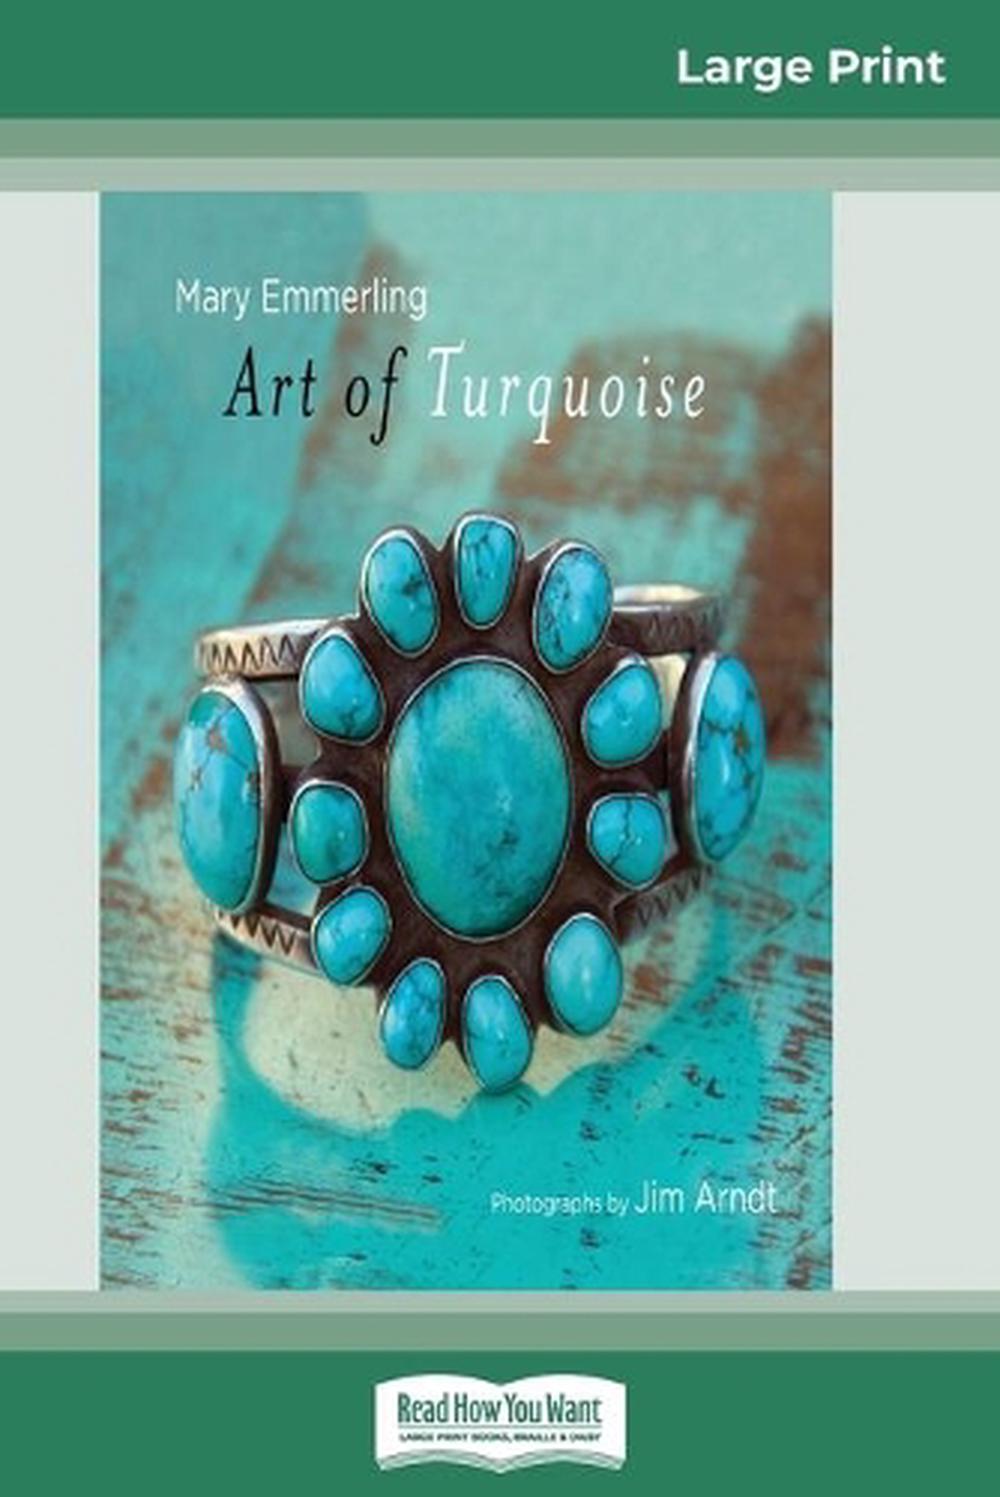 Art of Turquoise (16pt Large Print Edition) by Mary Emmerling Paperback ...